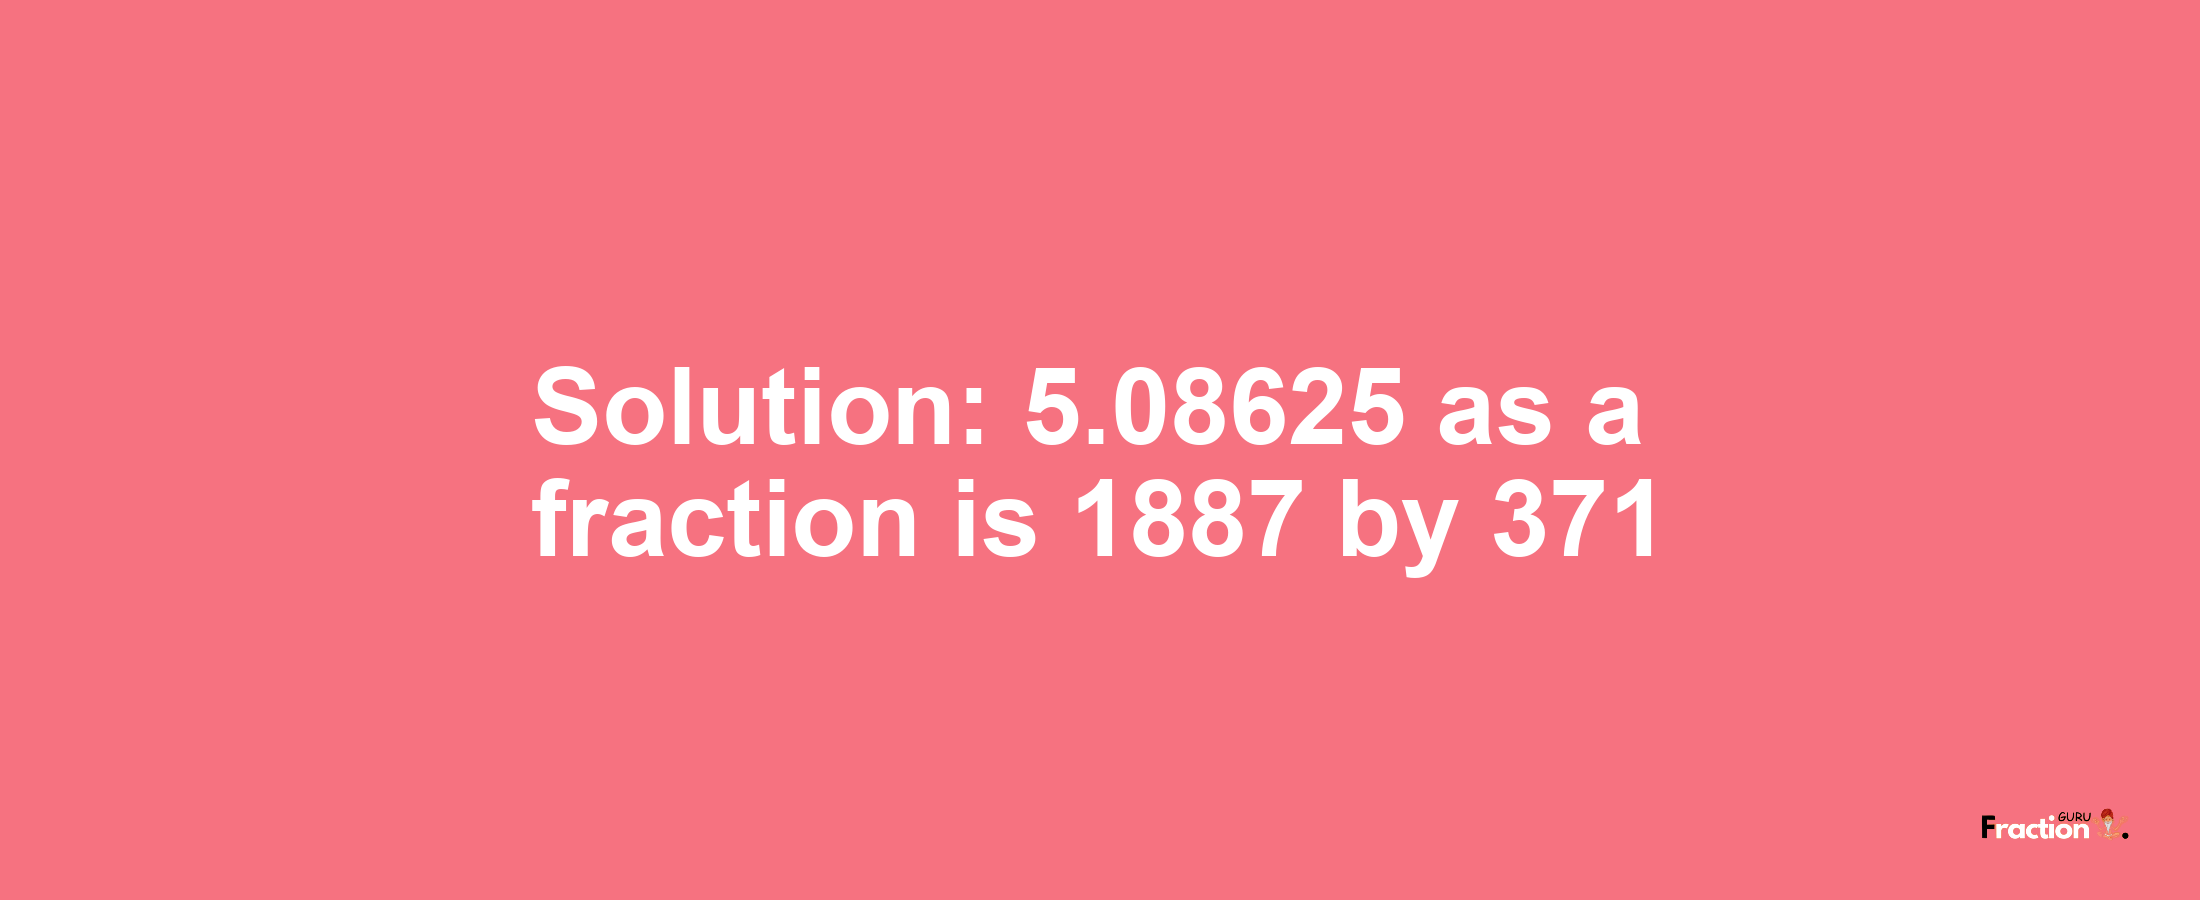 Solution:5.08625 as a fraction is 1887/371